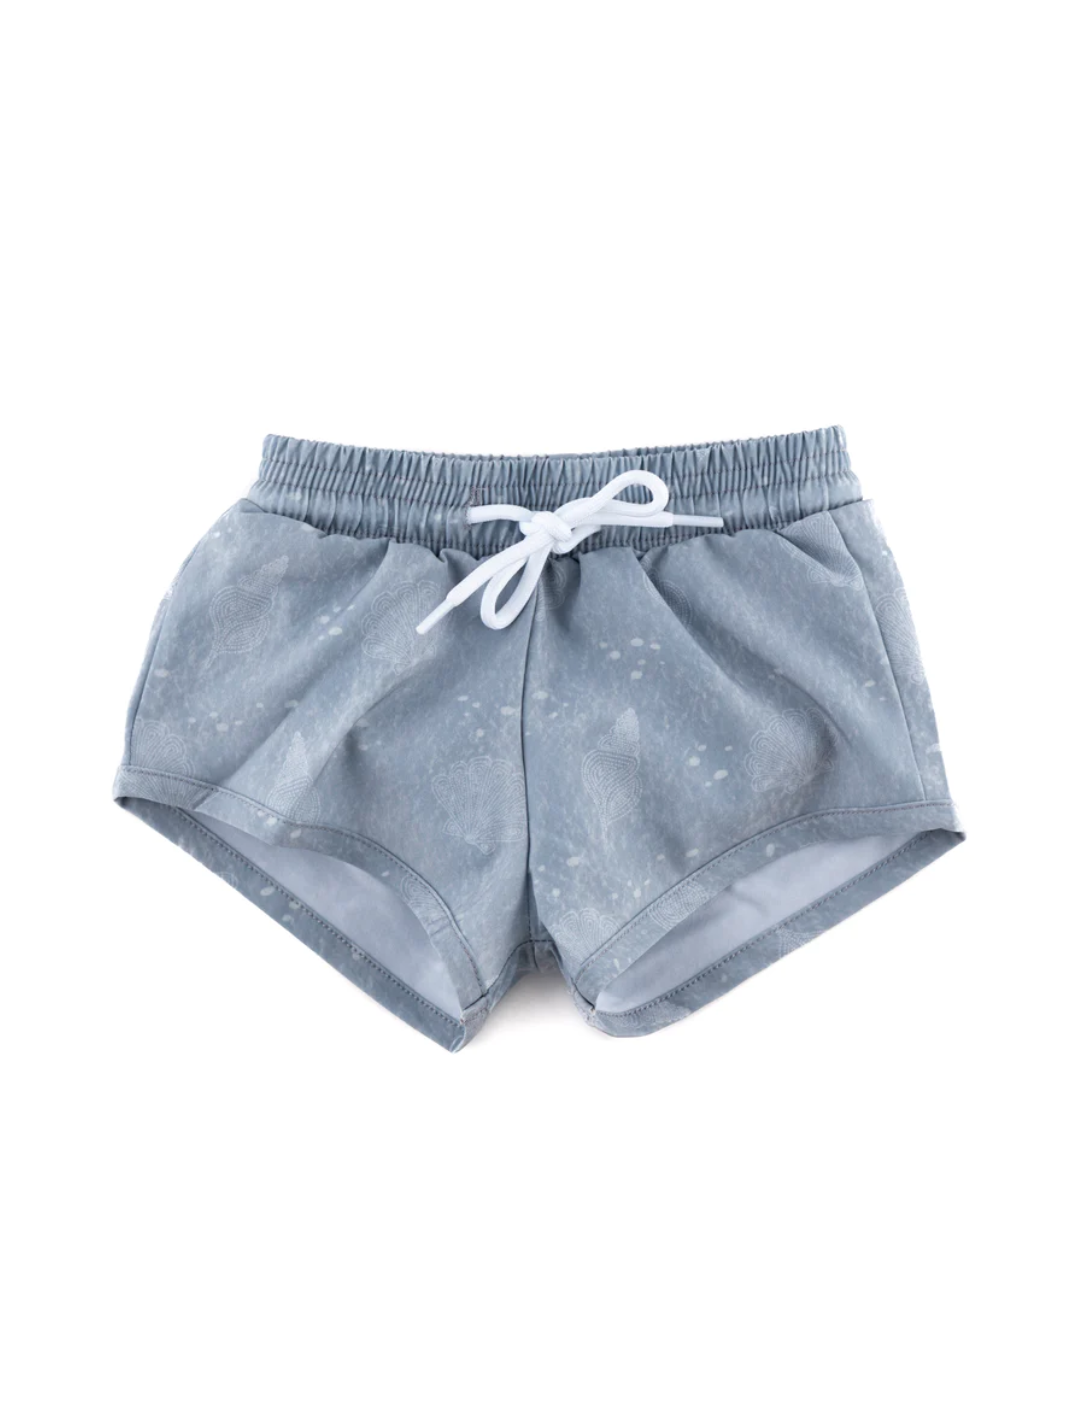 The "Cove" Boardies - Current Tyed (12M-9Y)